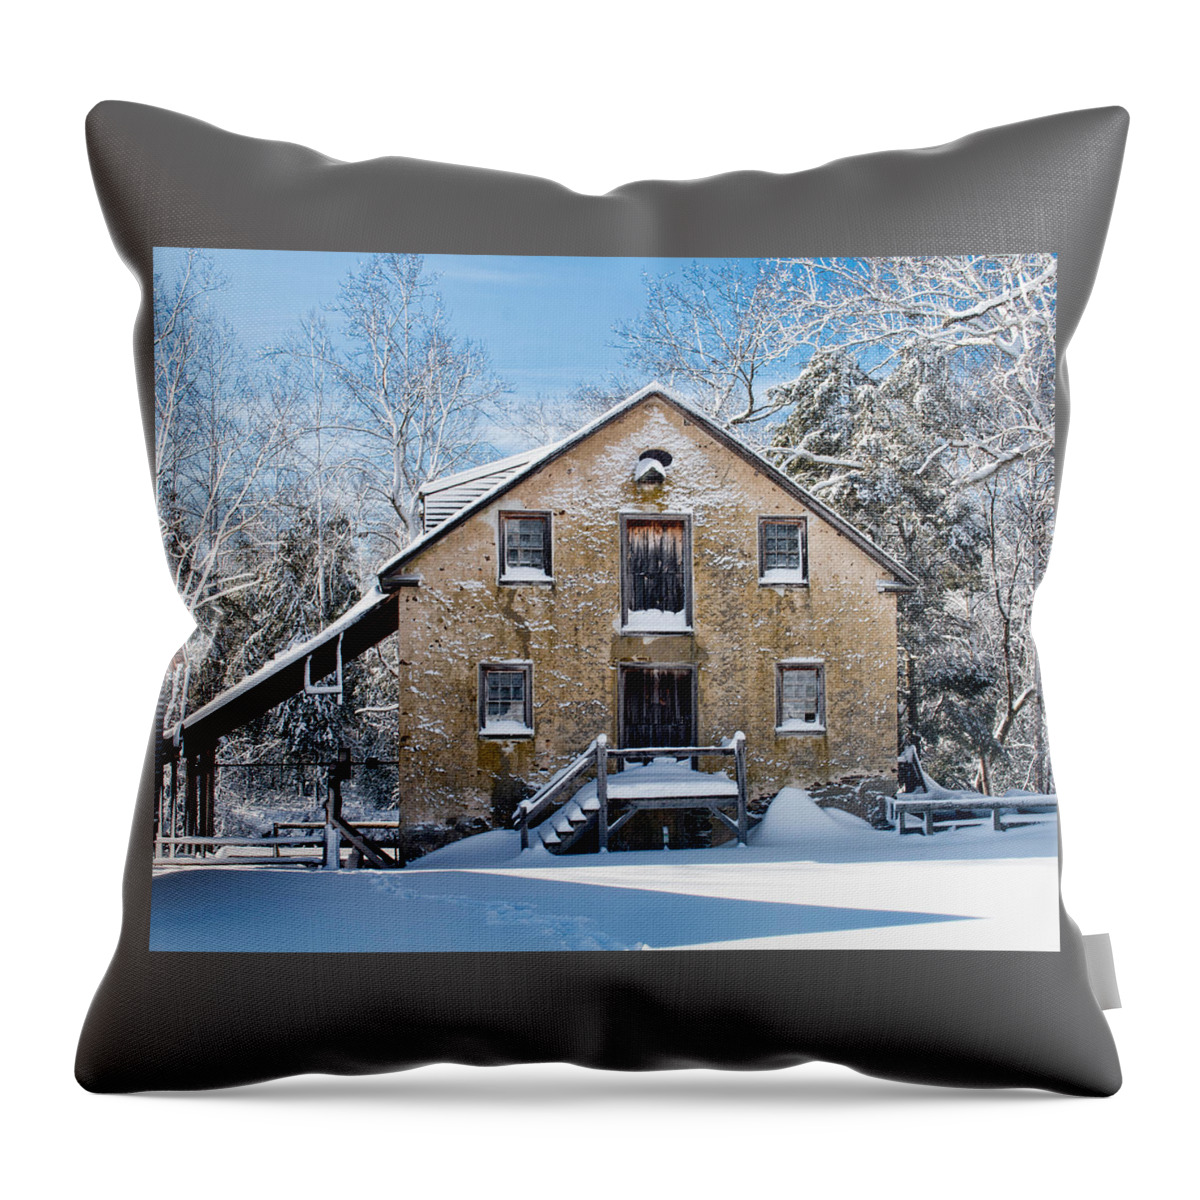 Grist Mill Throw Pillow featuring the photograph Gristmill In The Snow by Kristia Adams